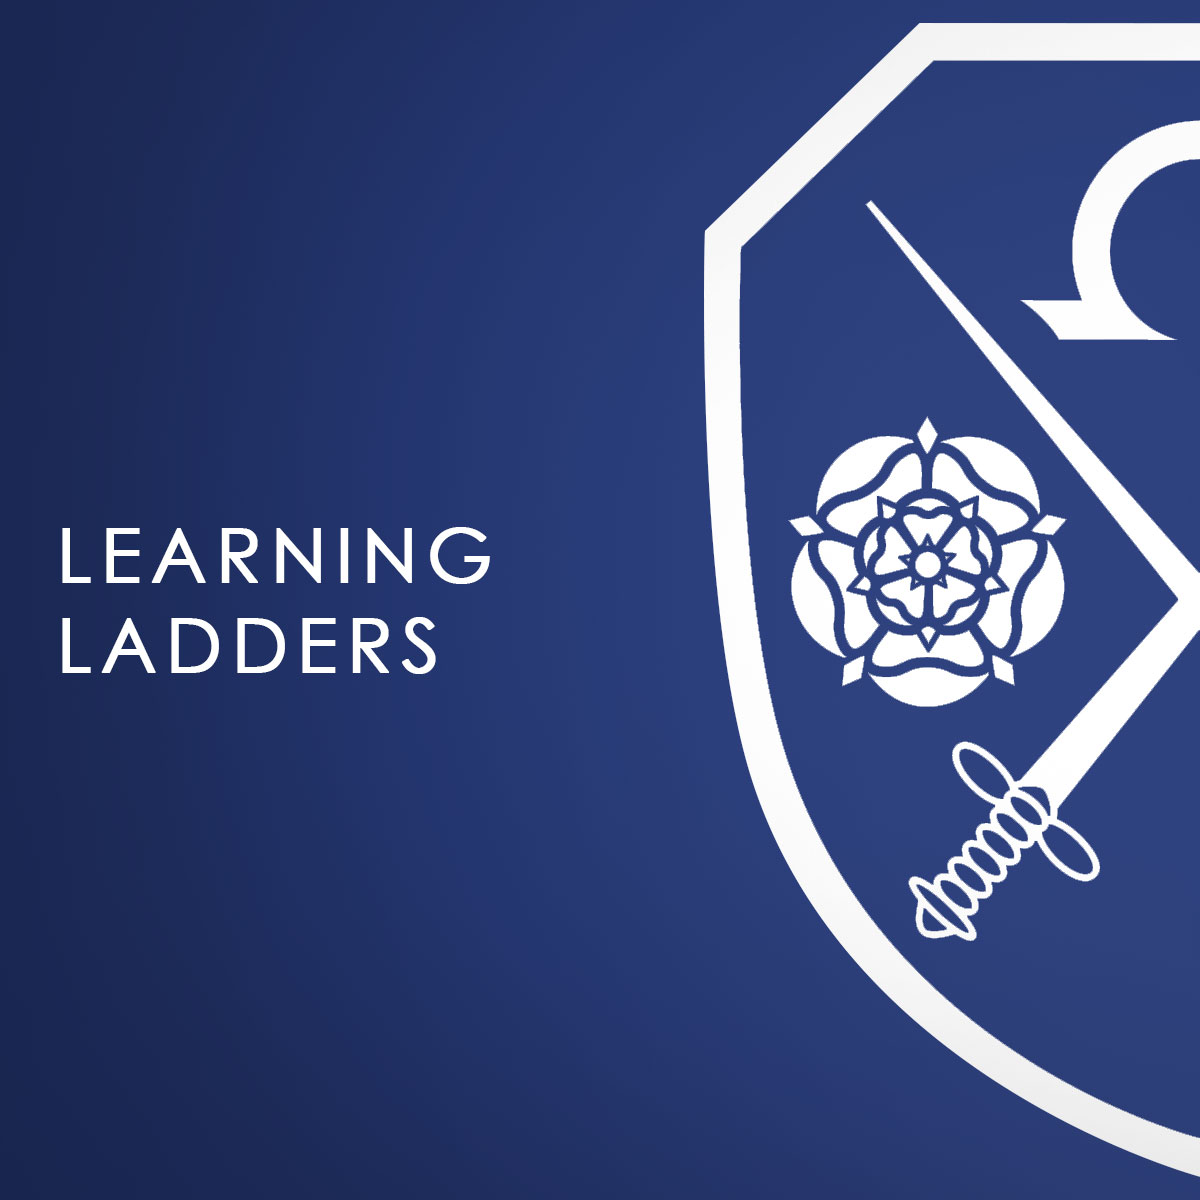 A blue background with the East Barnet School logo which says Learning Ladders